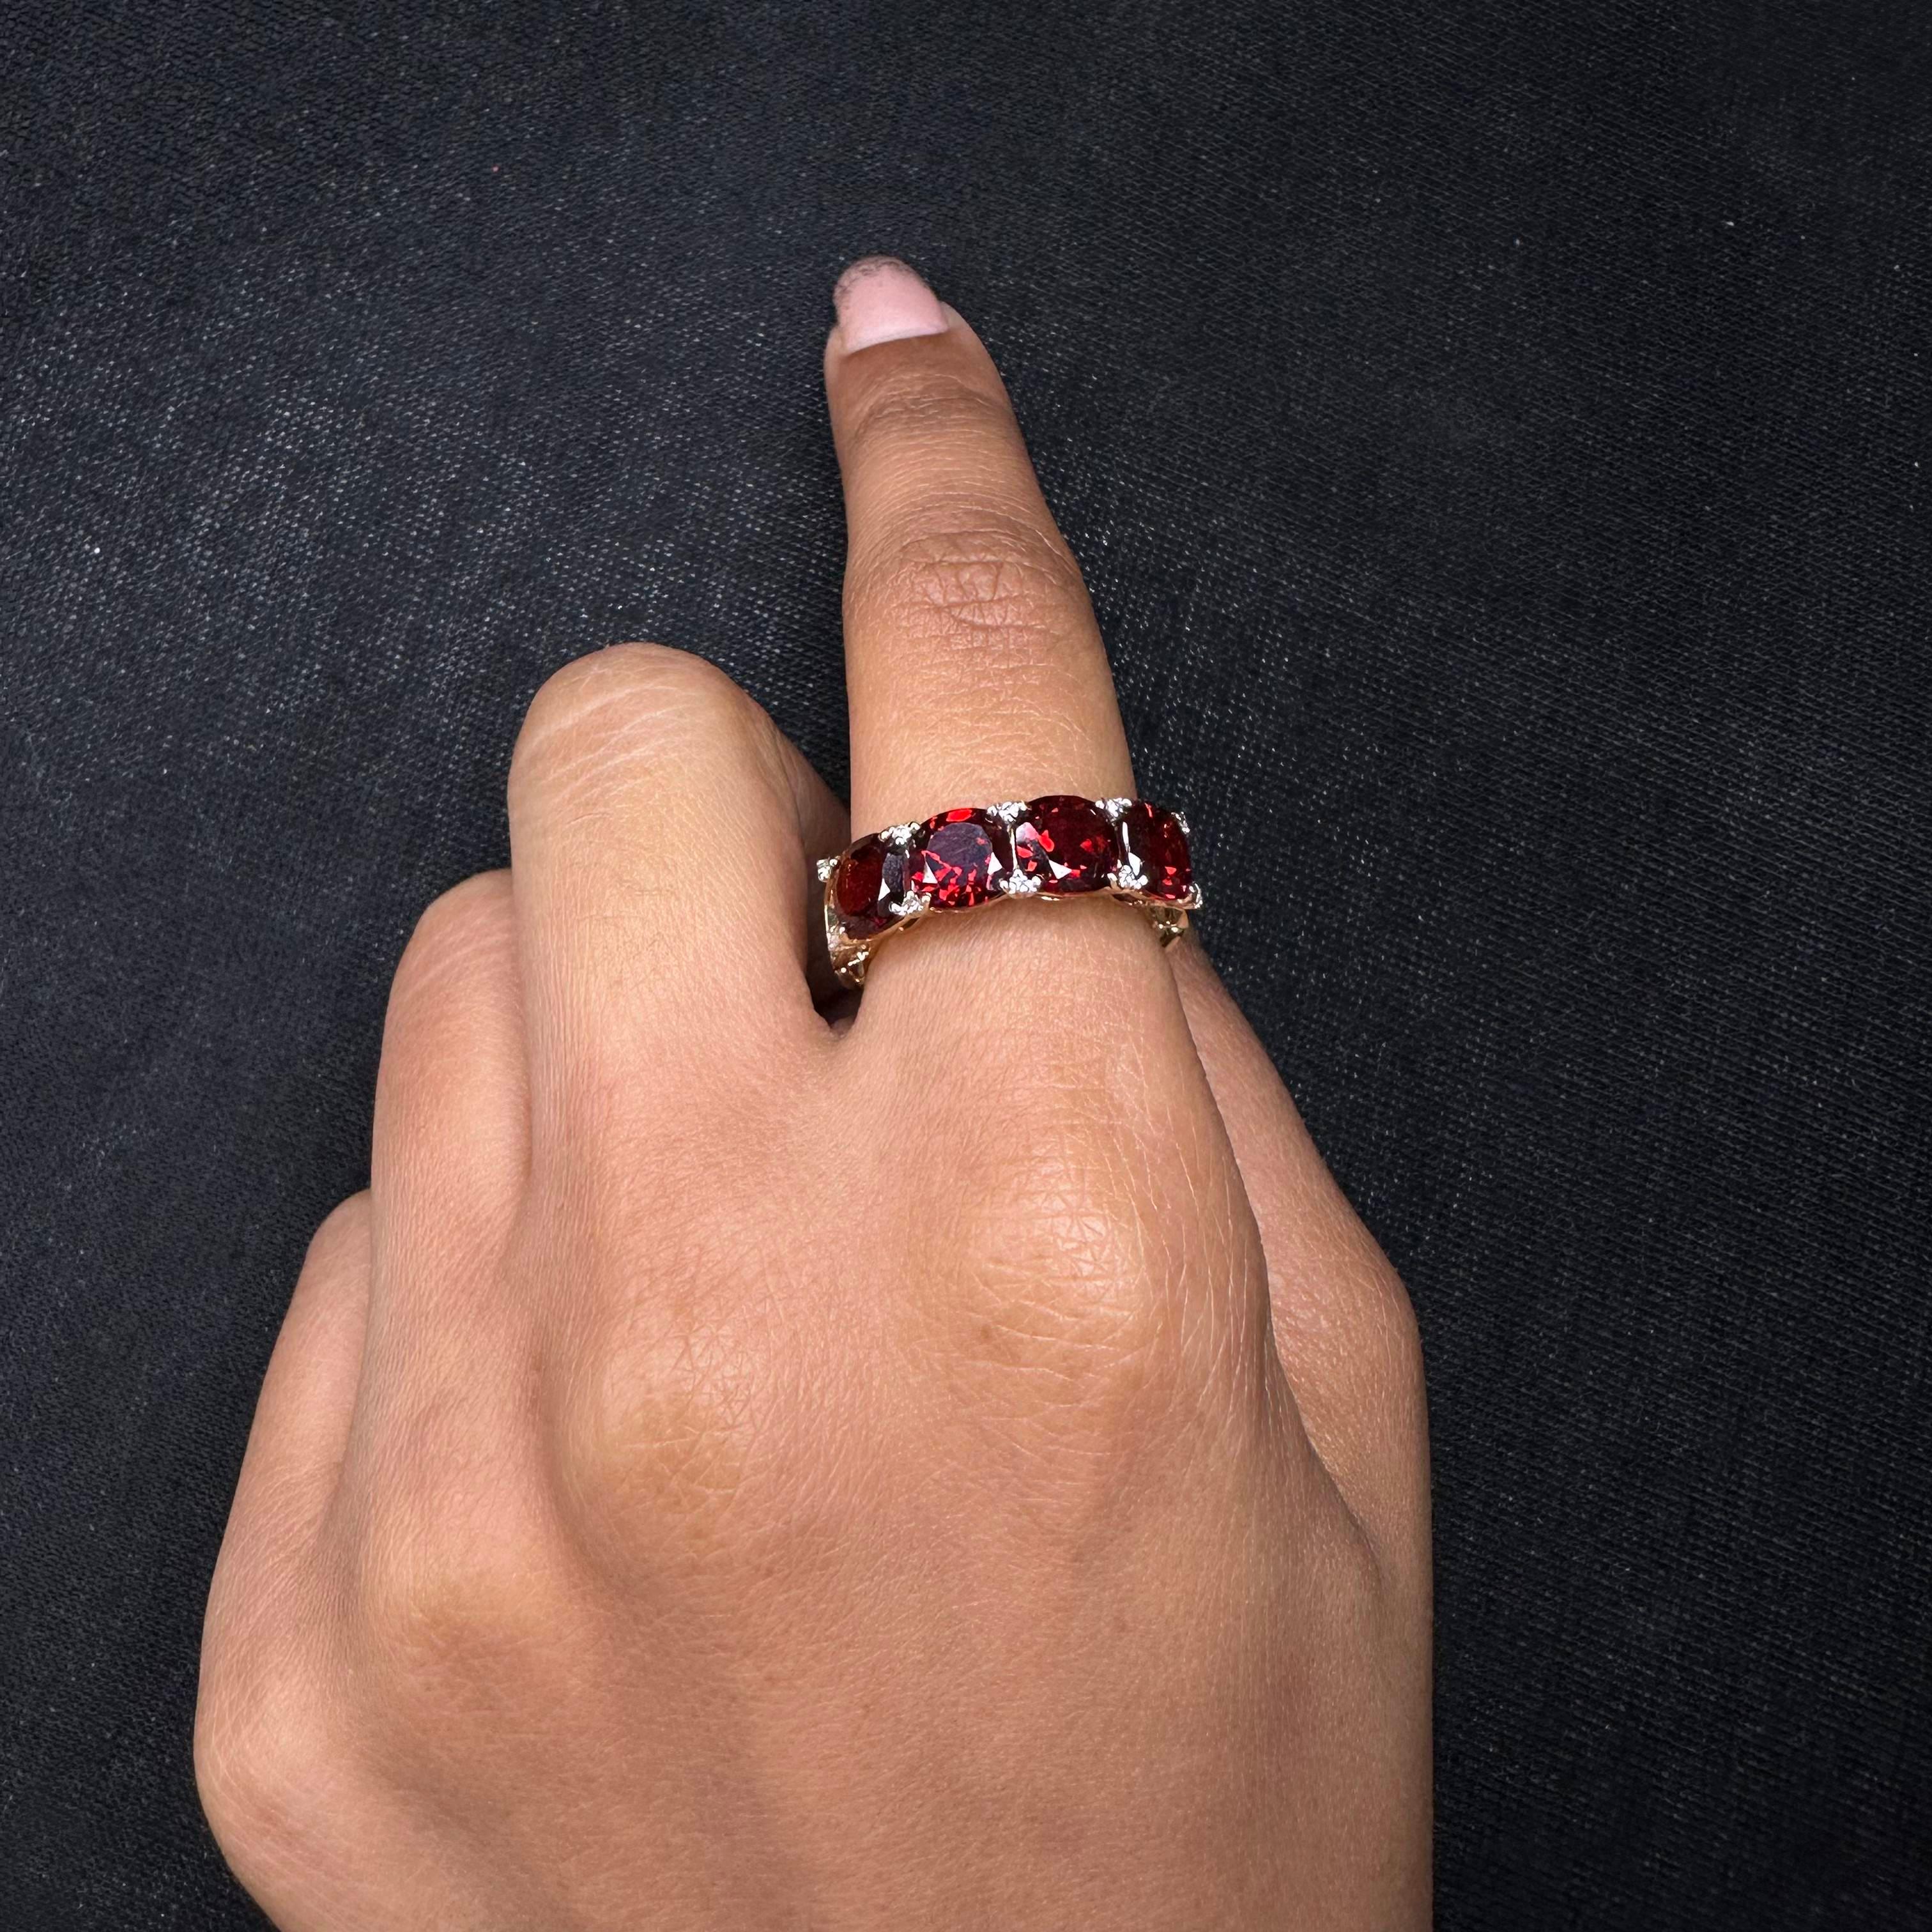 For Sale:  14k Solid Yellow Gold Natural 4.75 Carat Garnet Ring with Diamonds for Her 9